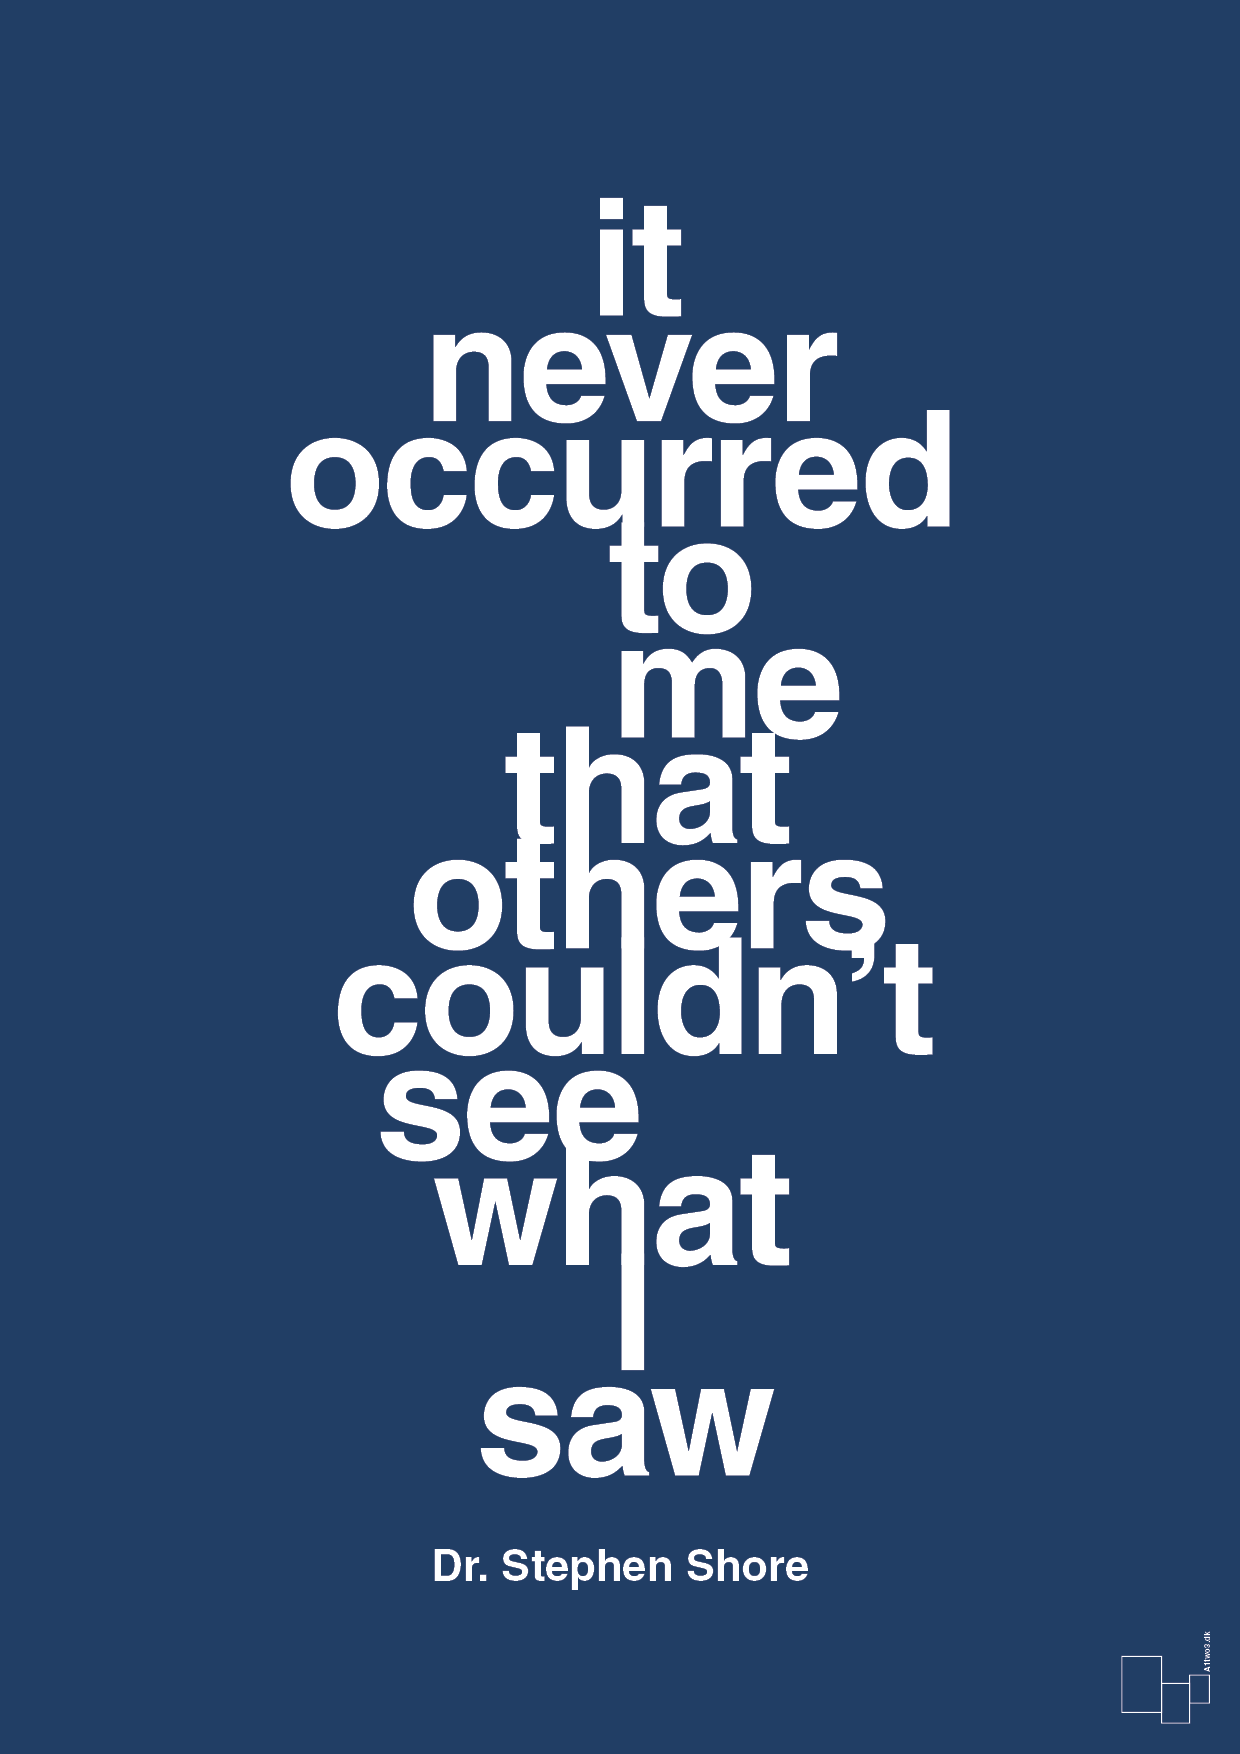 it never occurred to me that others couldn’t see what I saw - Plakat med Samfund i Lapis Blue